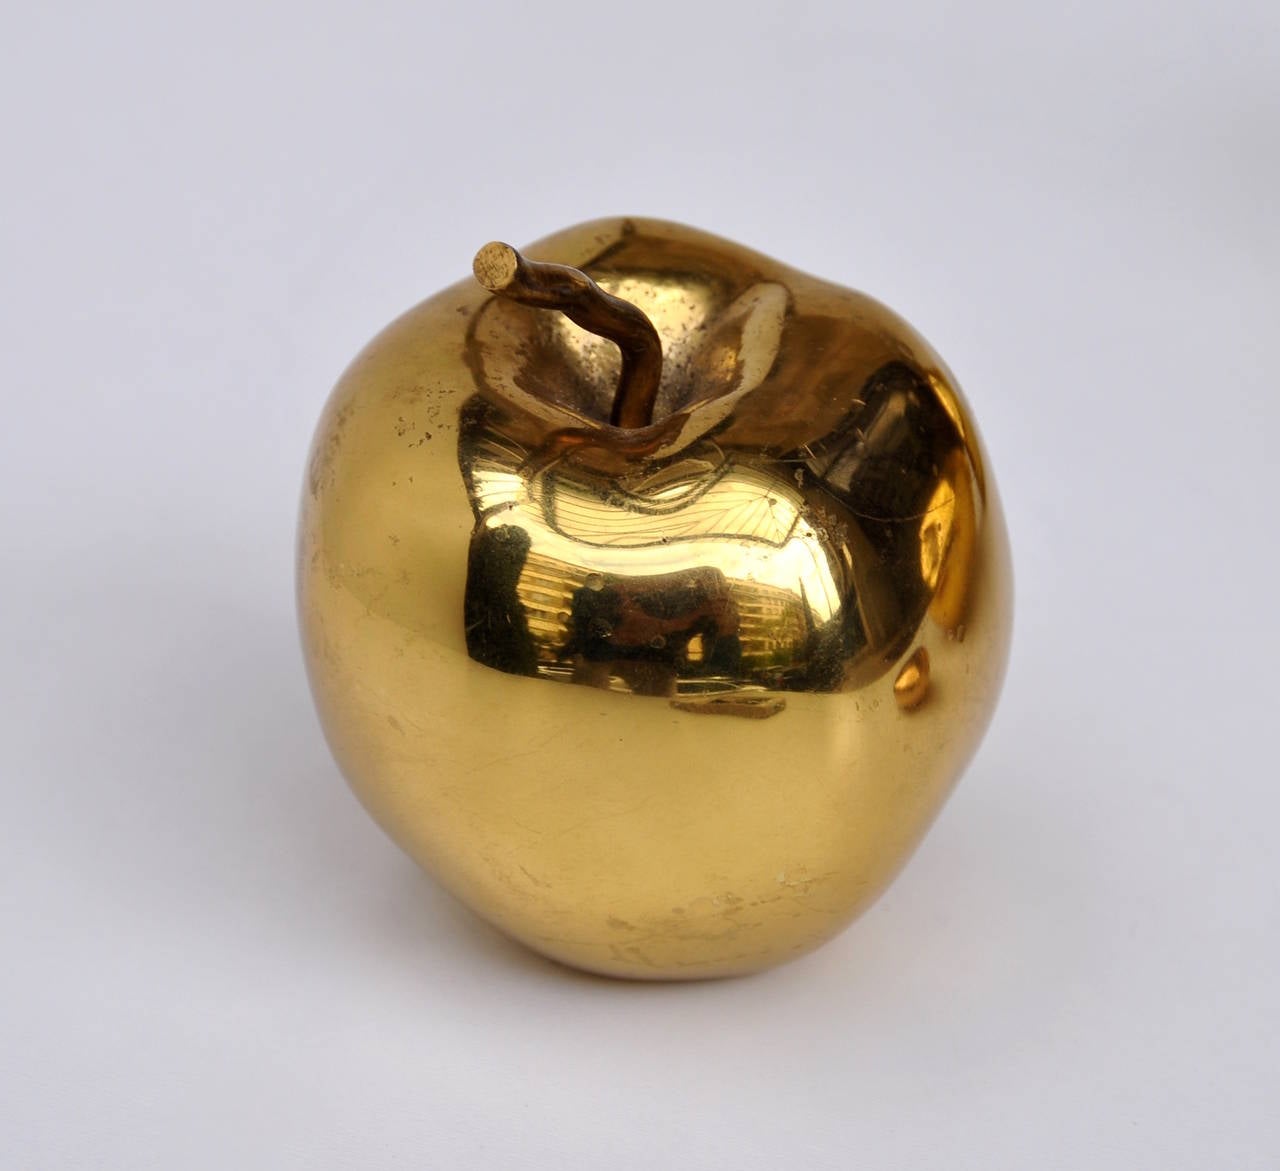 Lifesize Gilded Bronze Fruits and Stone For Sale 4